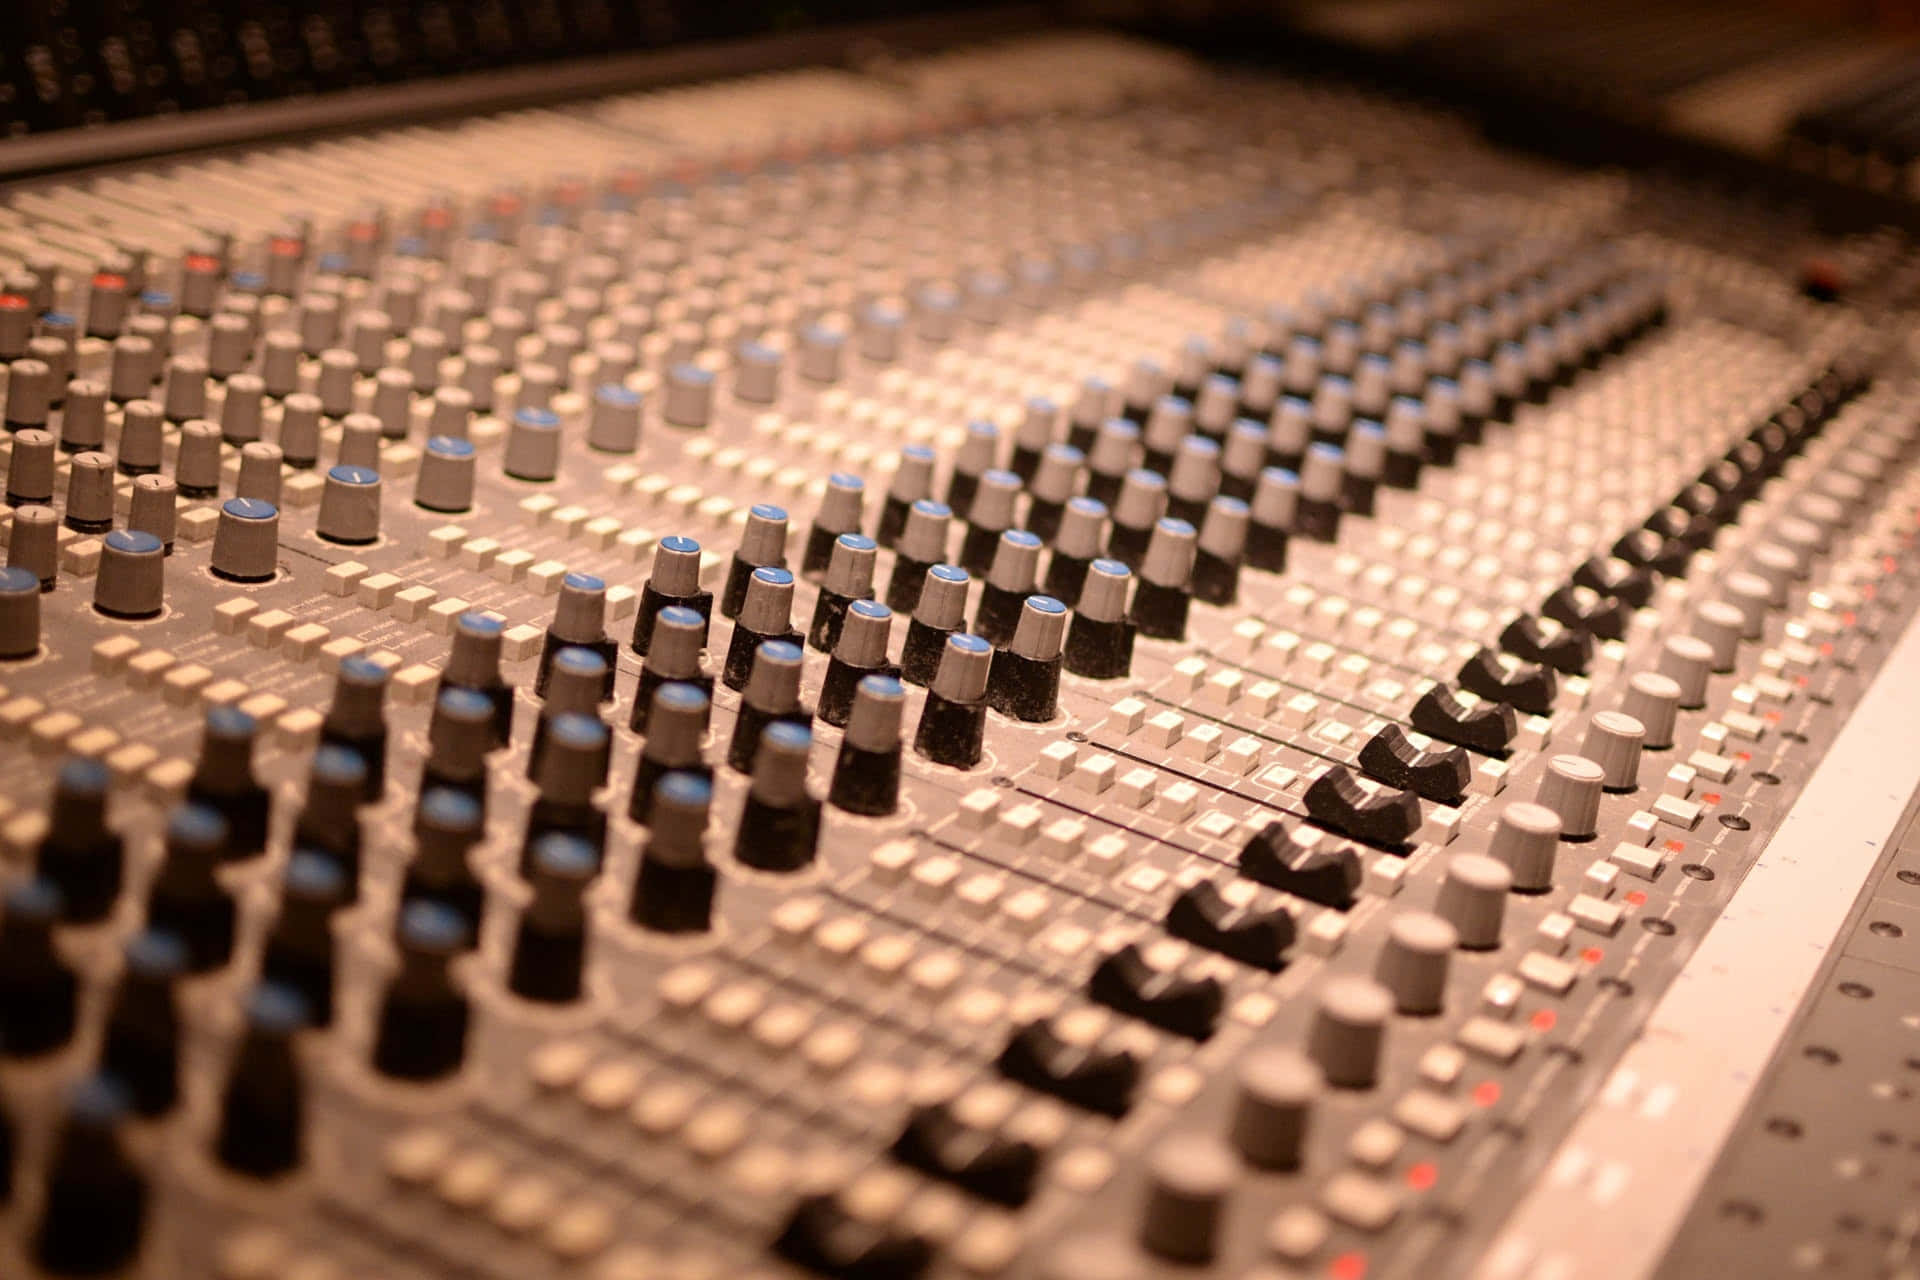 A Close Up Of A Mixing Board